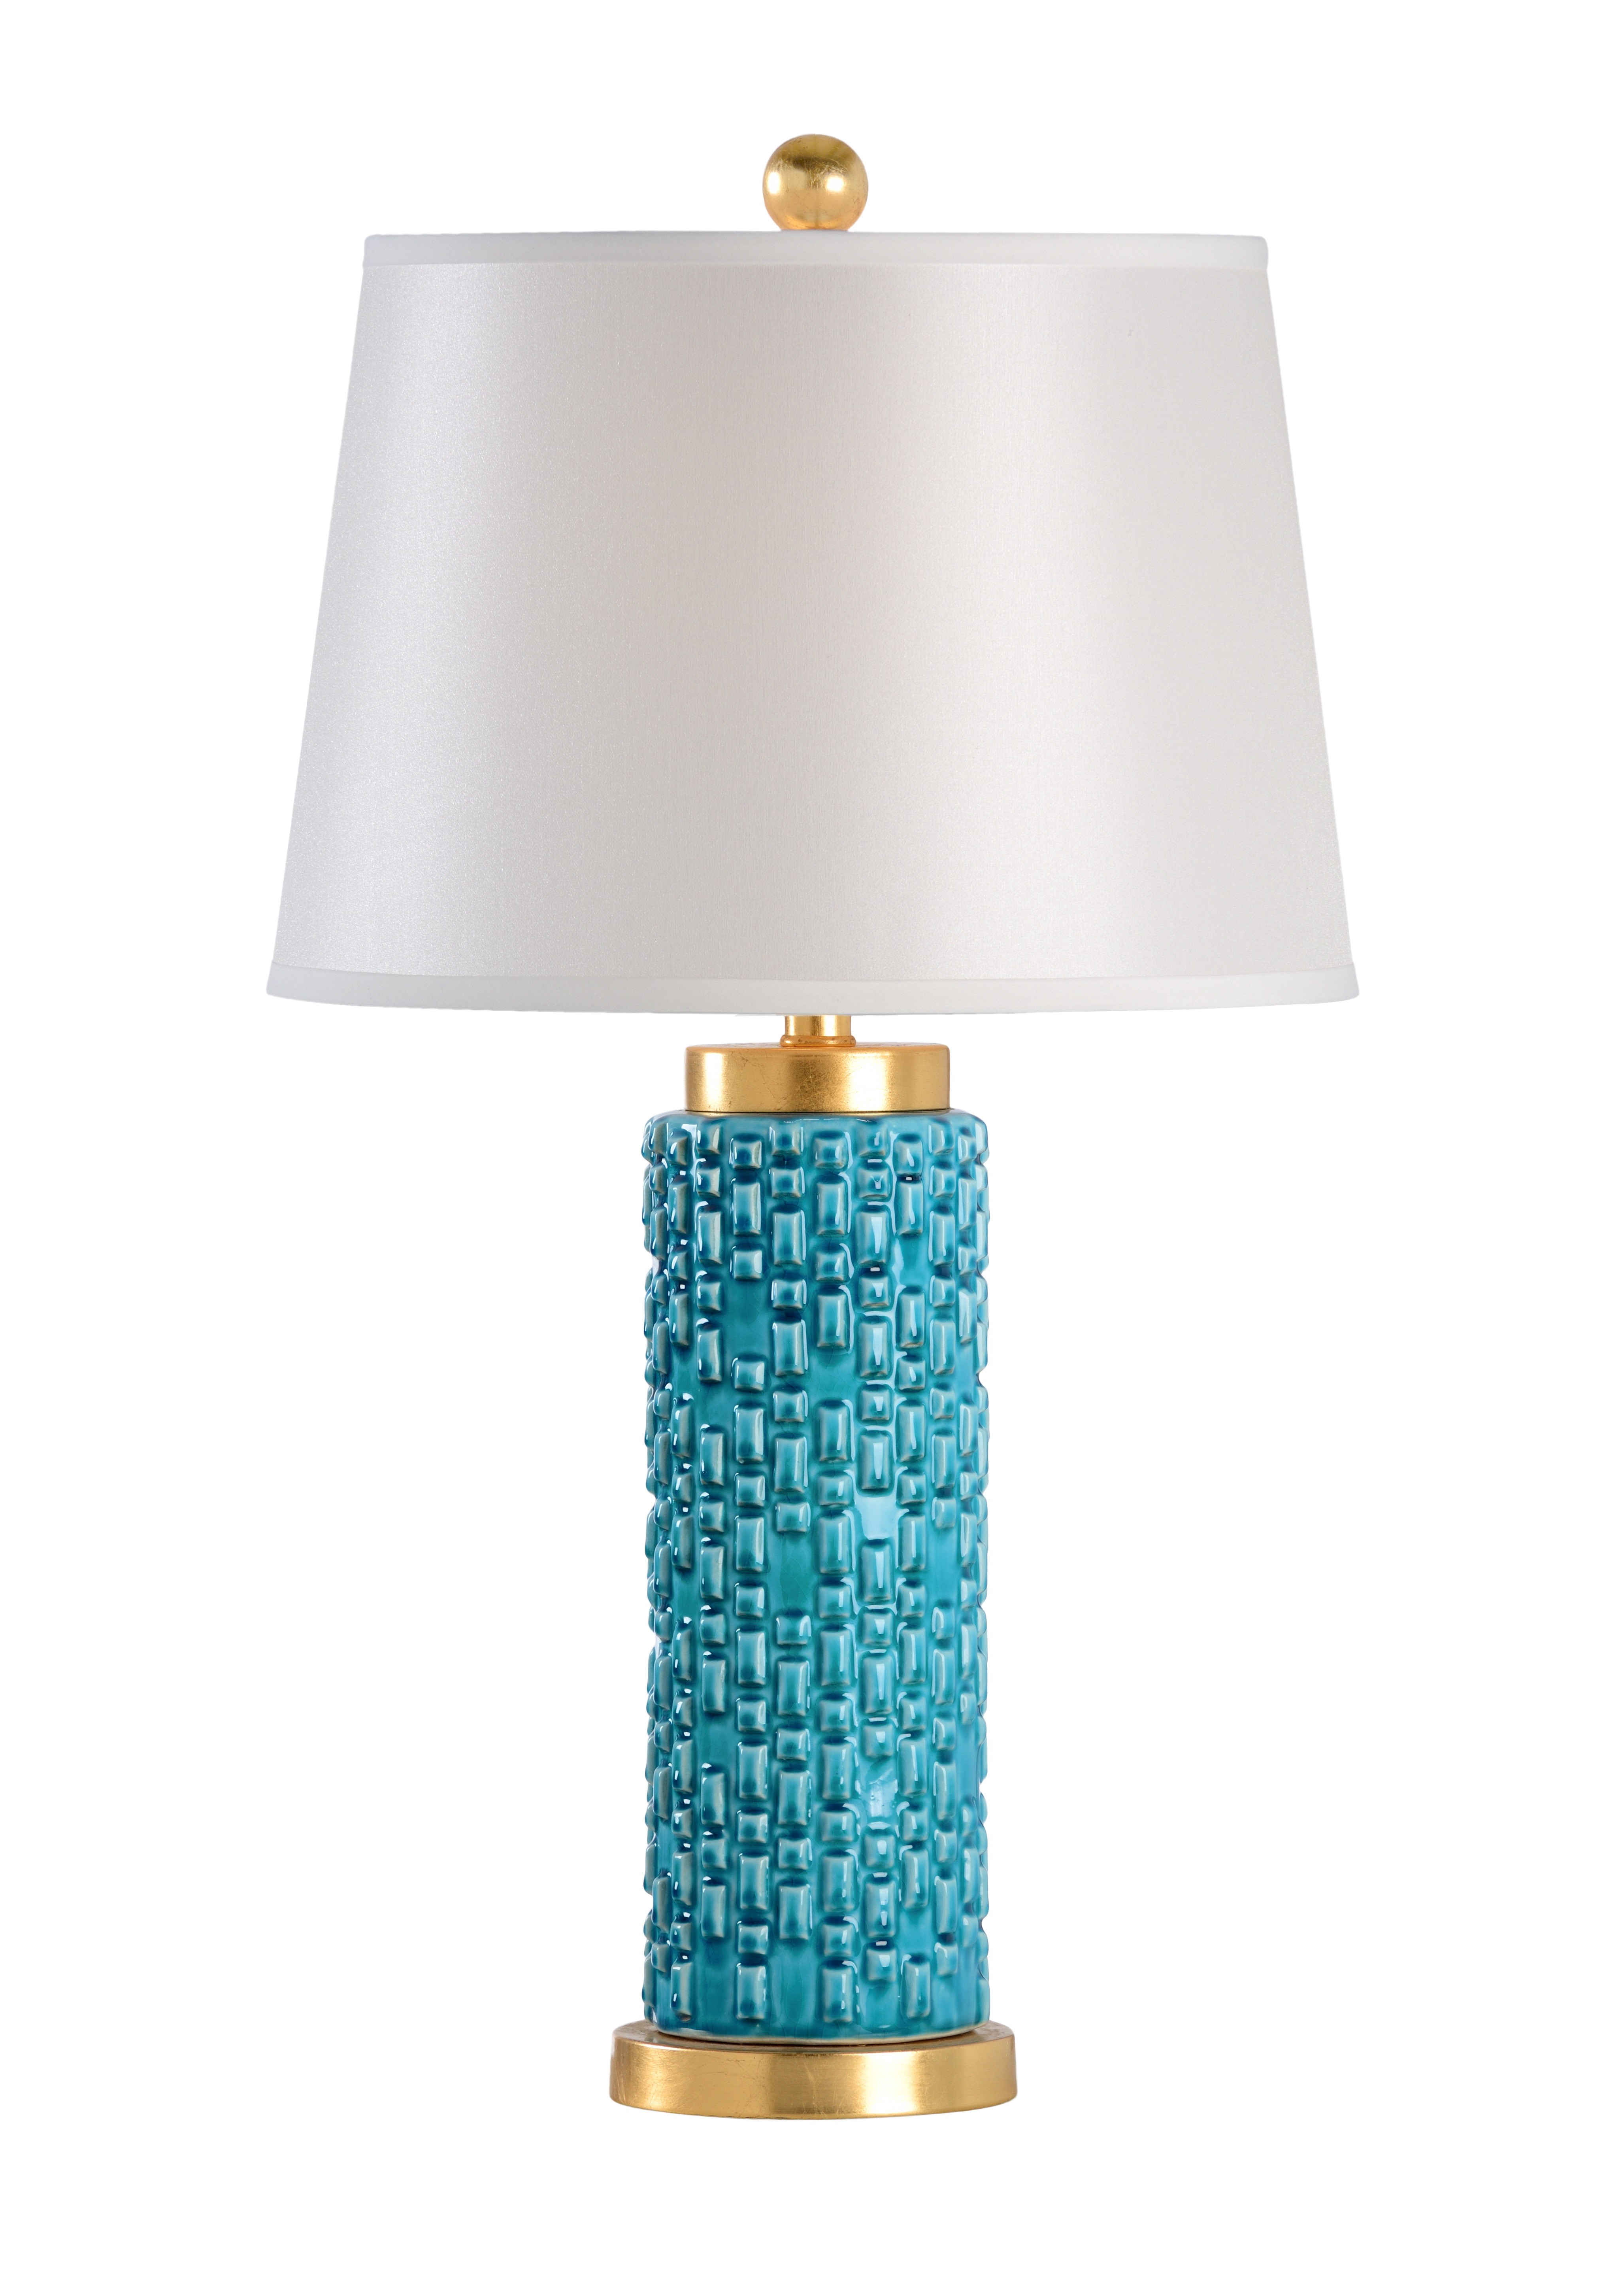 Hot selling product in American market ceramic table lamp for motel lighting supply from zhongshan 